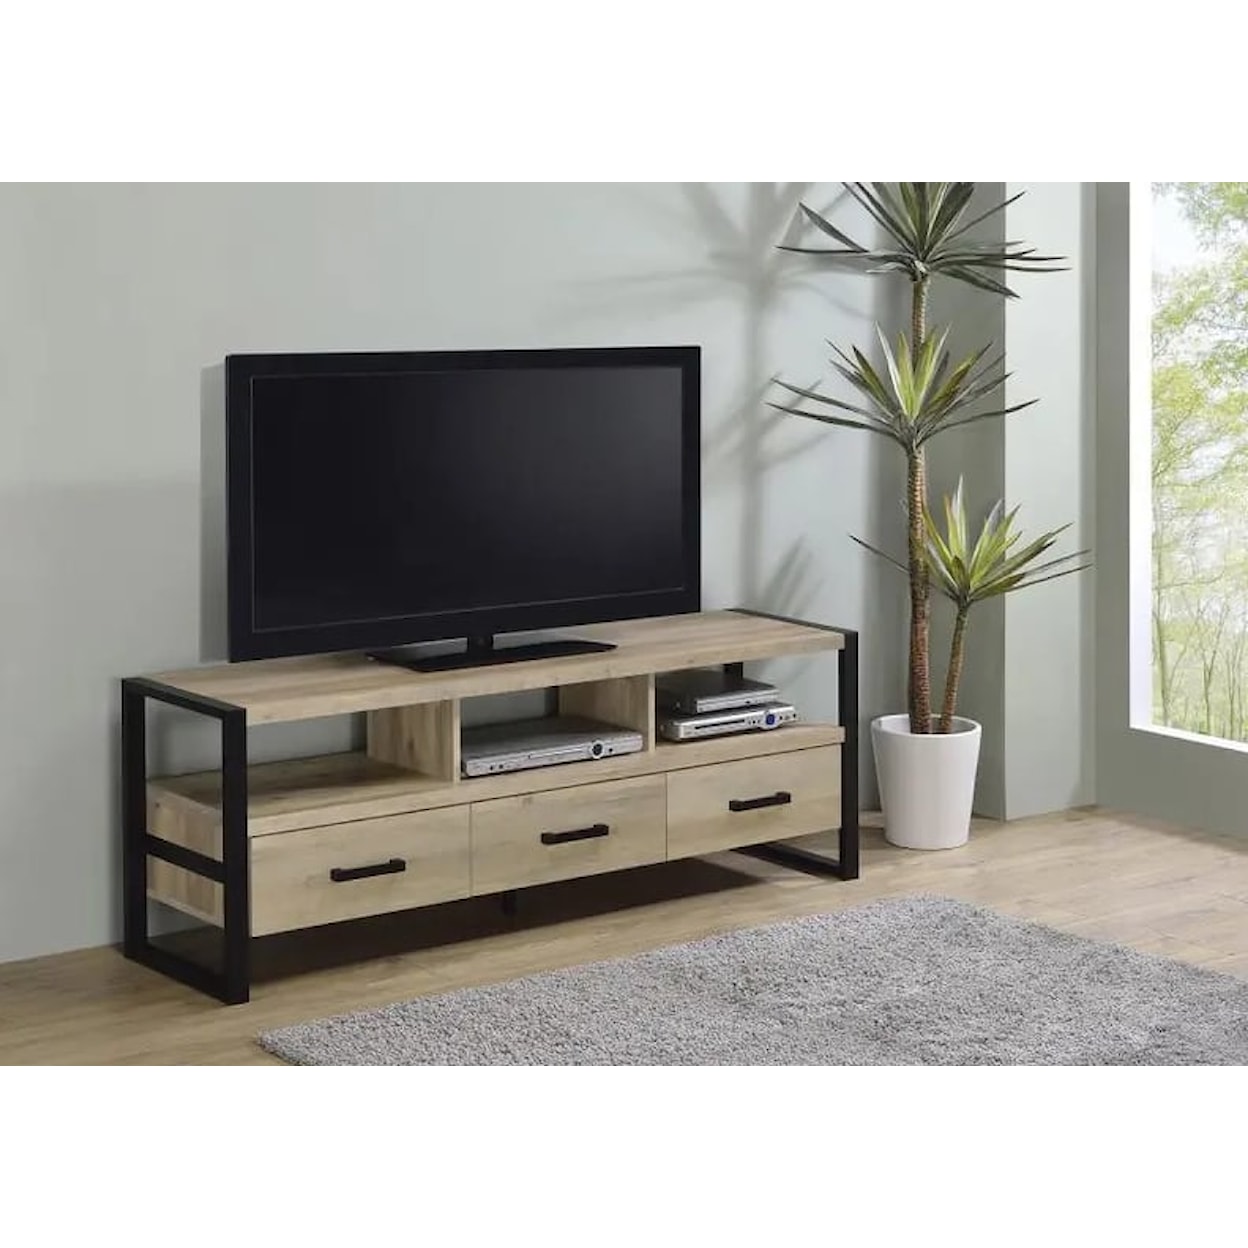 Coaster TV Stand JAKE NATURAL 60" TV STAND |